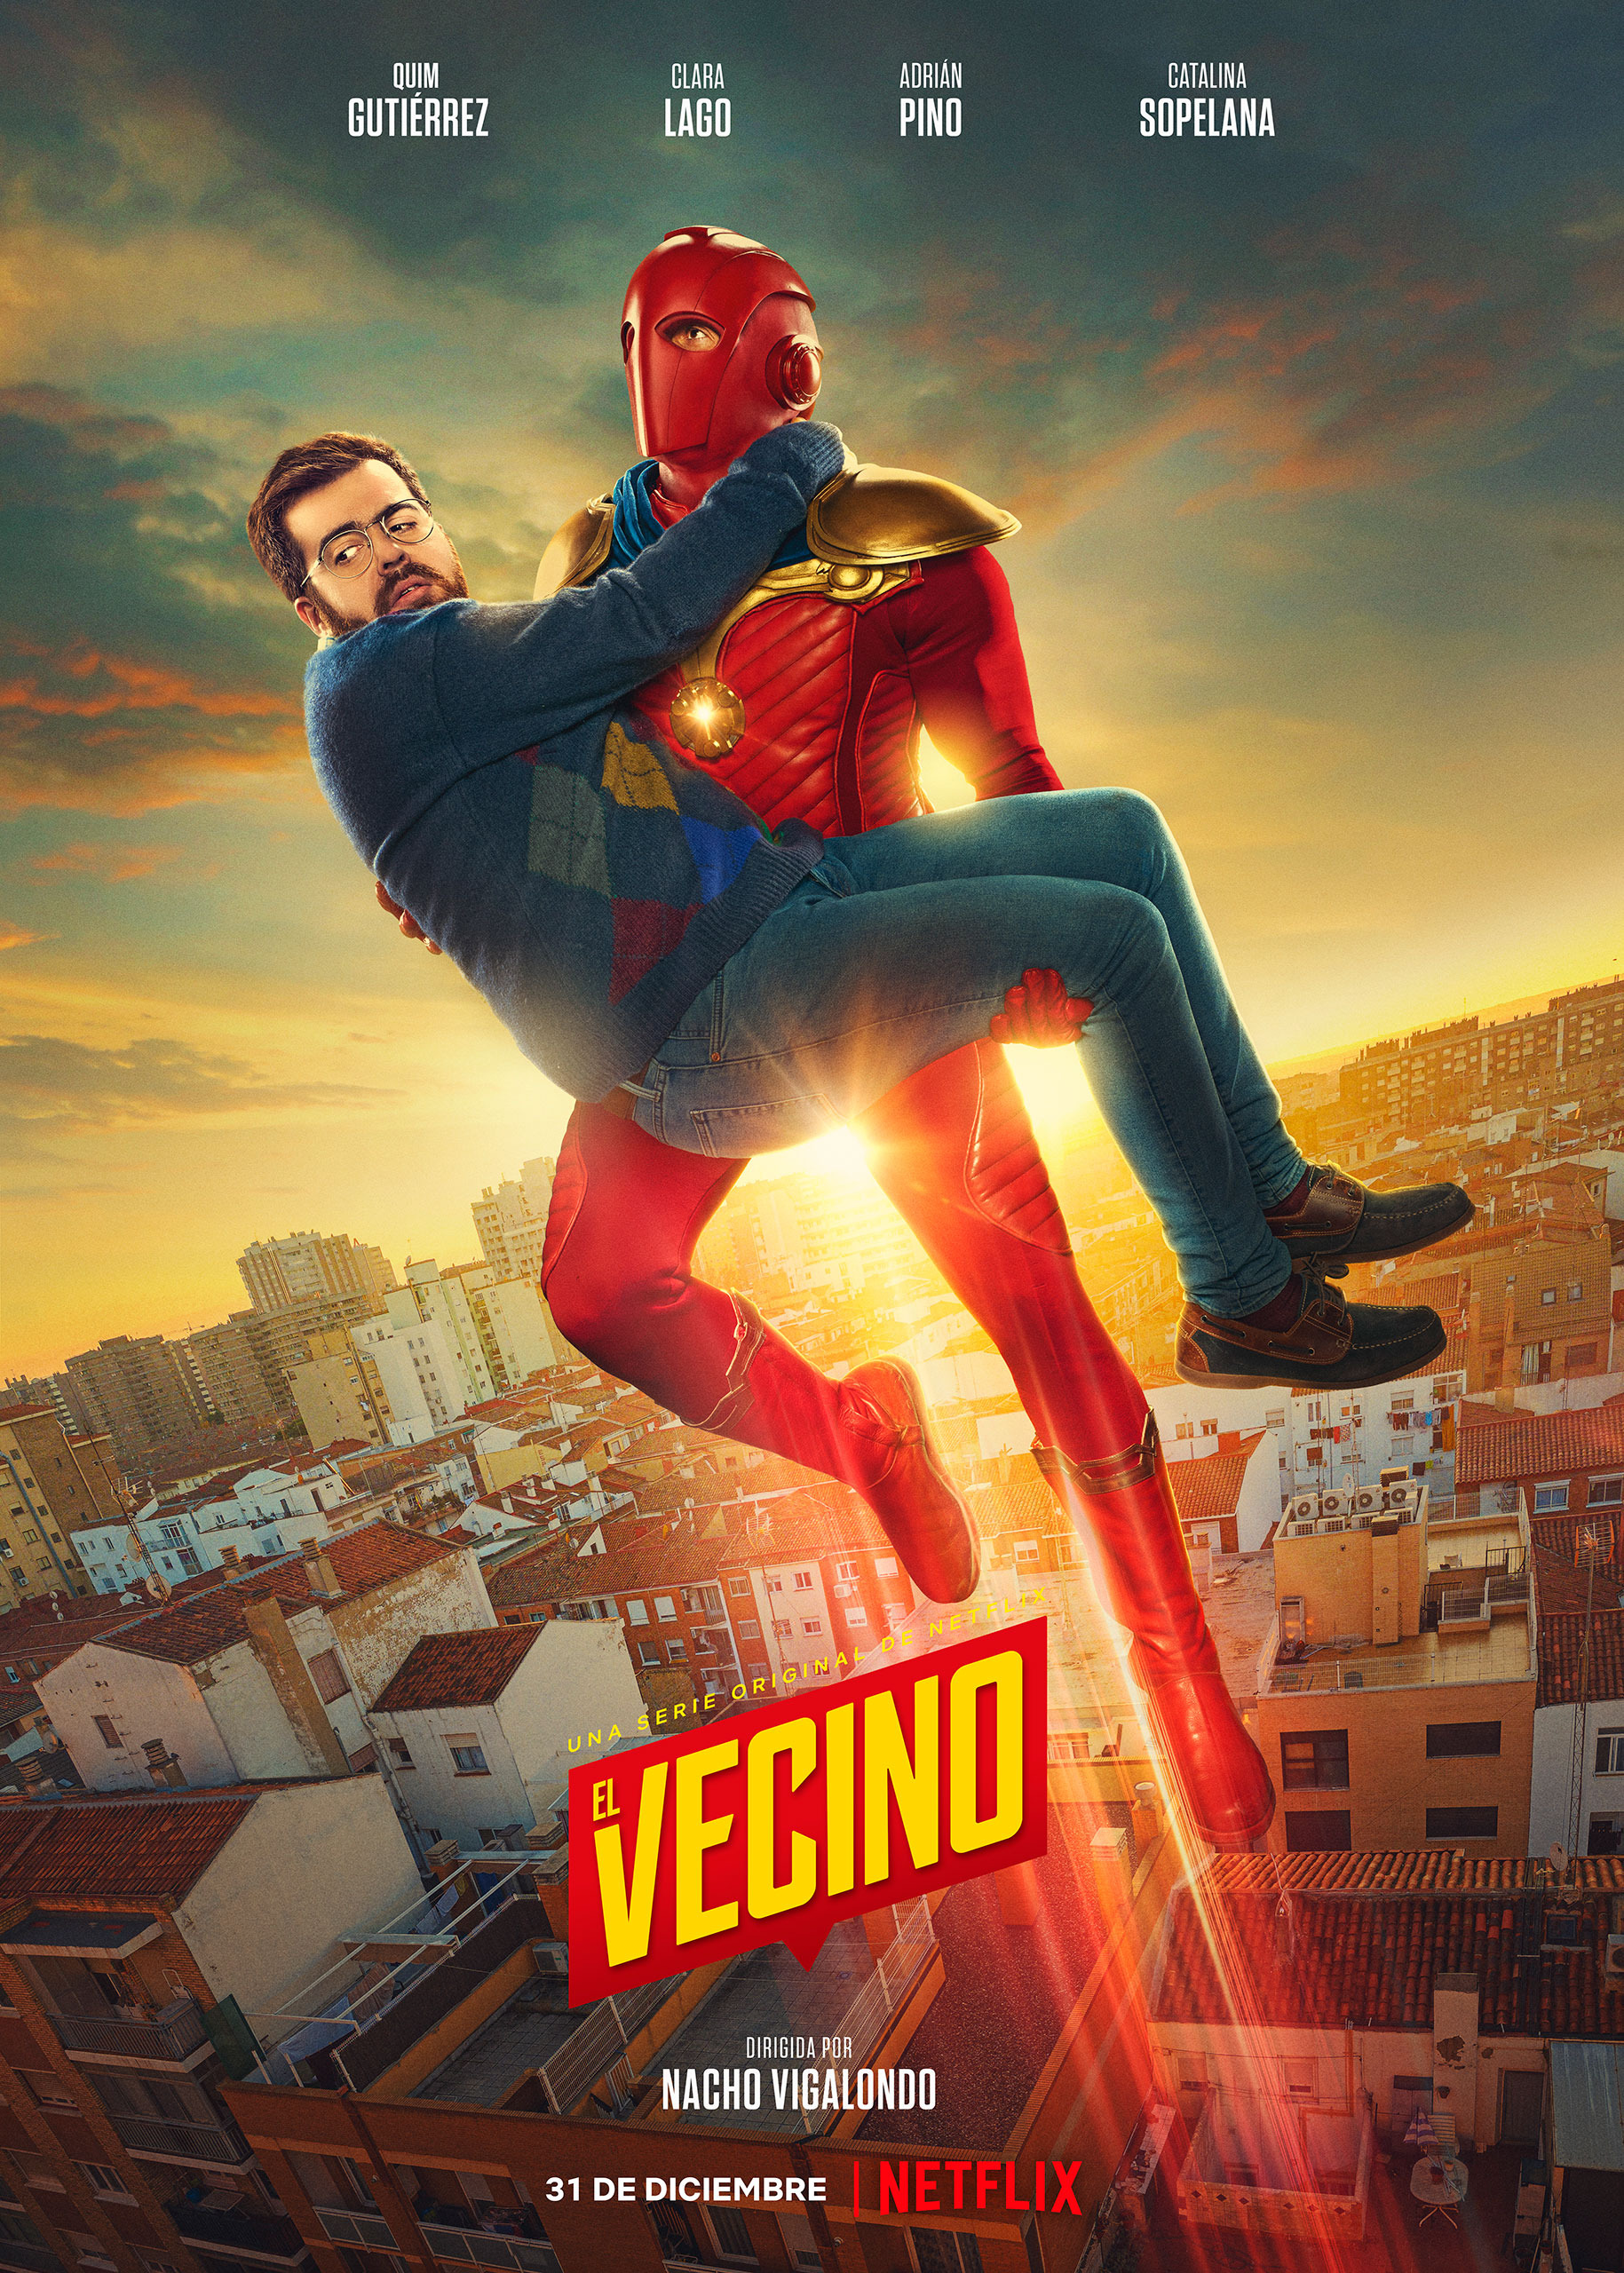 Mega Sized TV Poster Image for El vecino (#5 of 9)